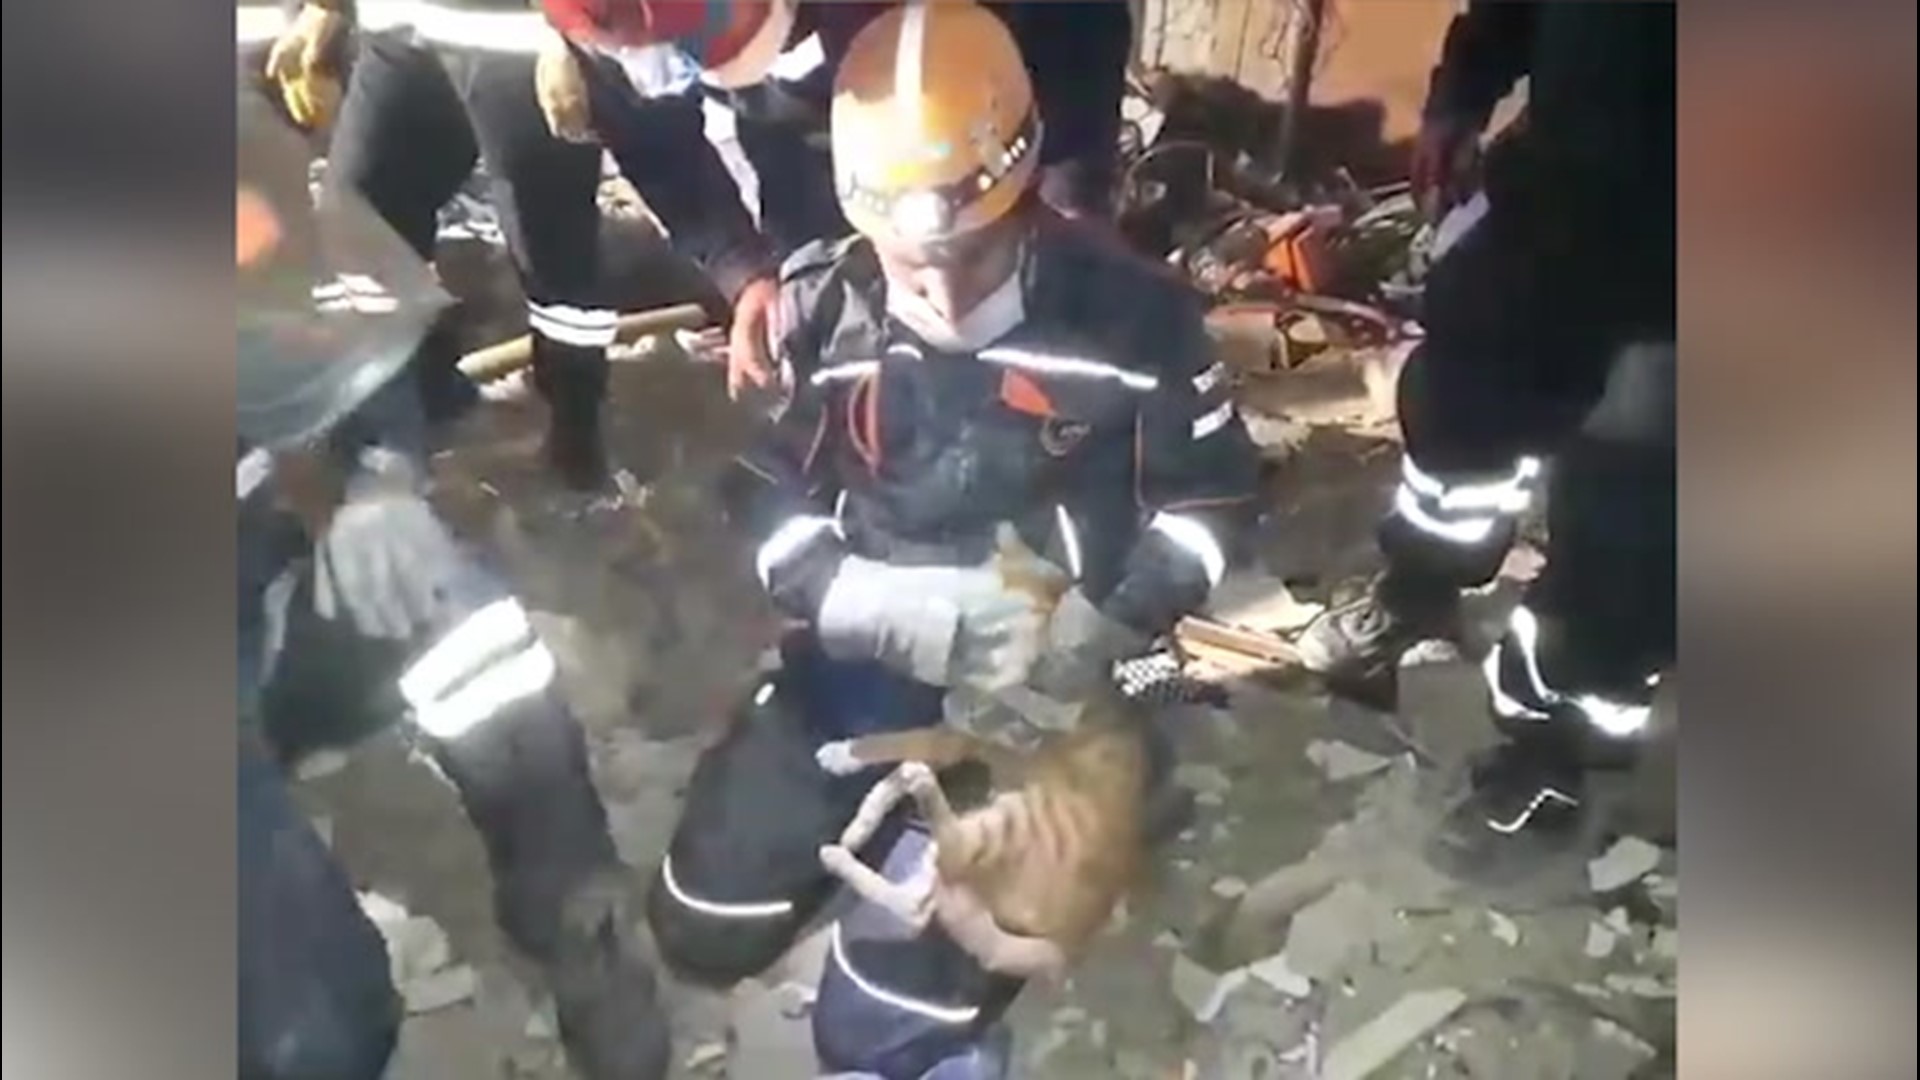 First responders counted a cat among those rescued on Oct. 31, after a magnitude 7.0 earthquake razed buildings in Izmir, Turkey.